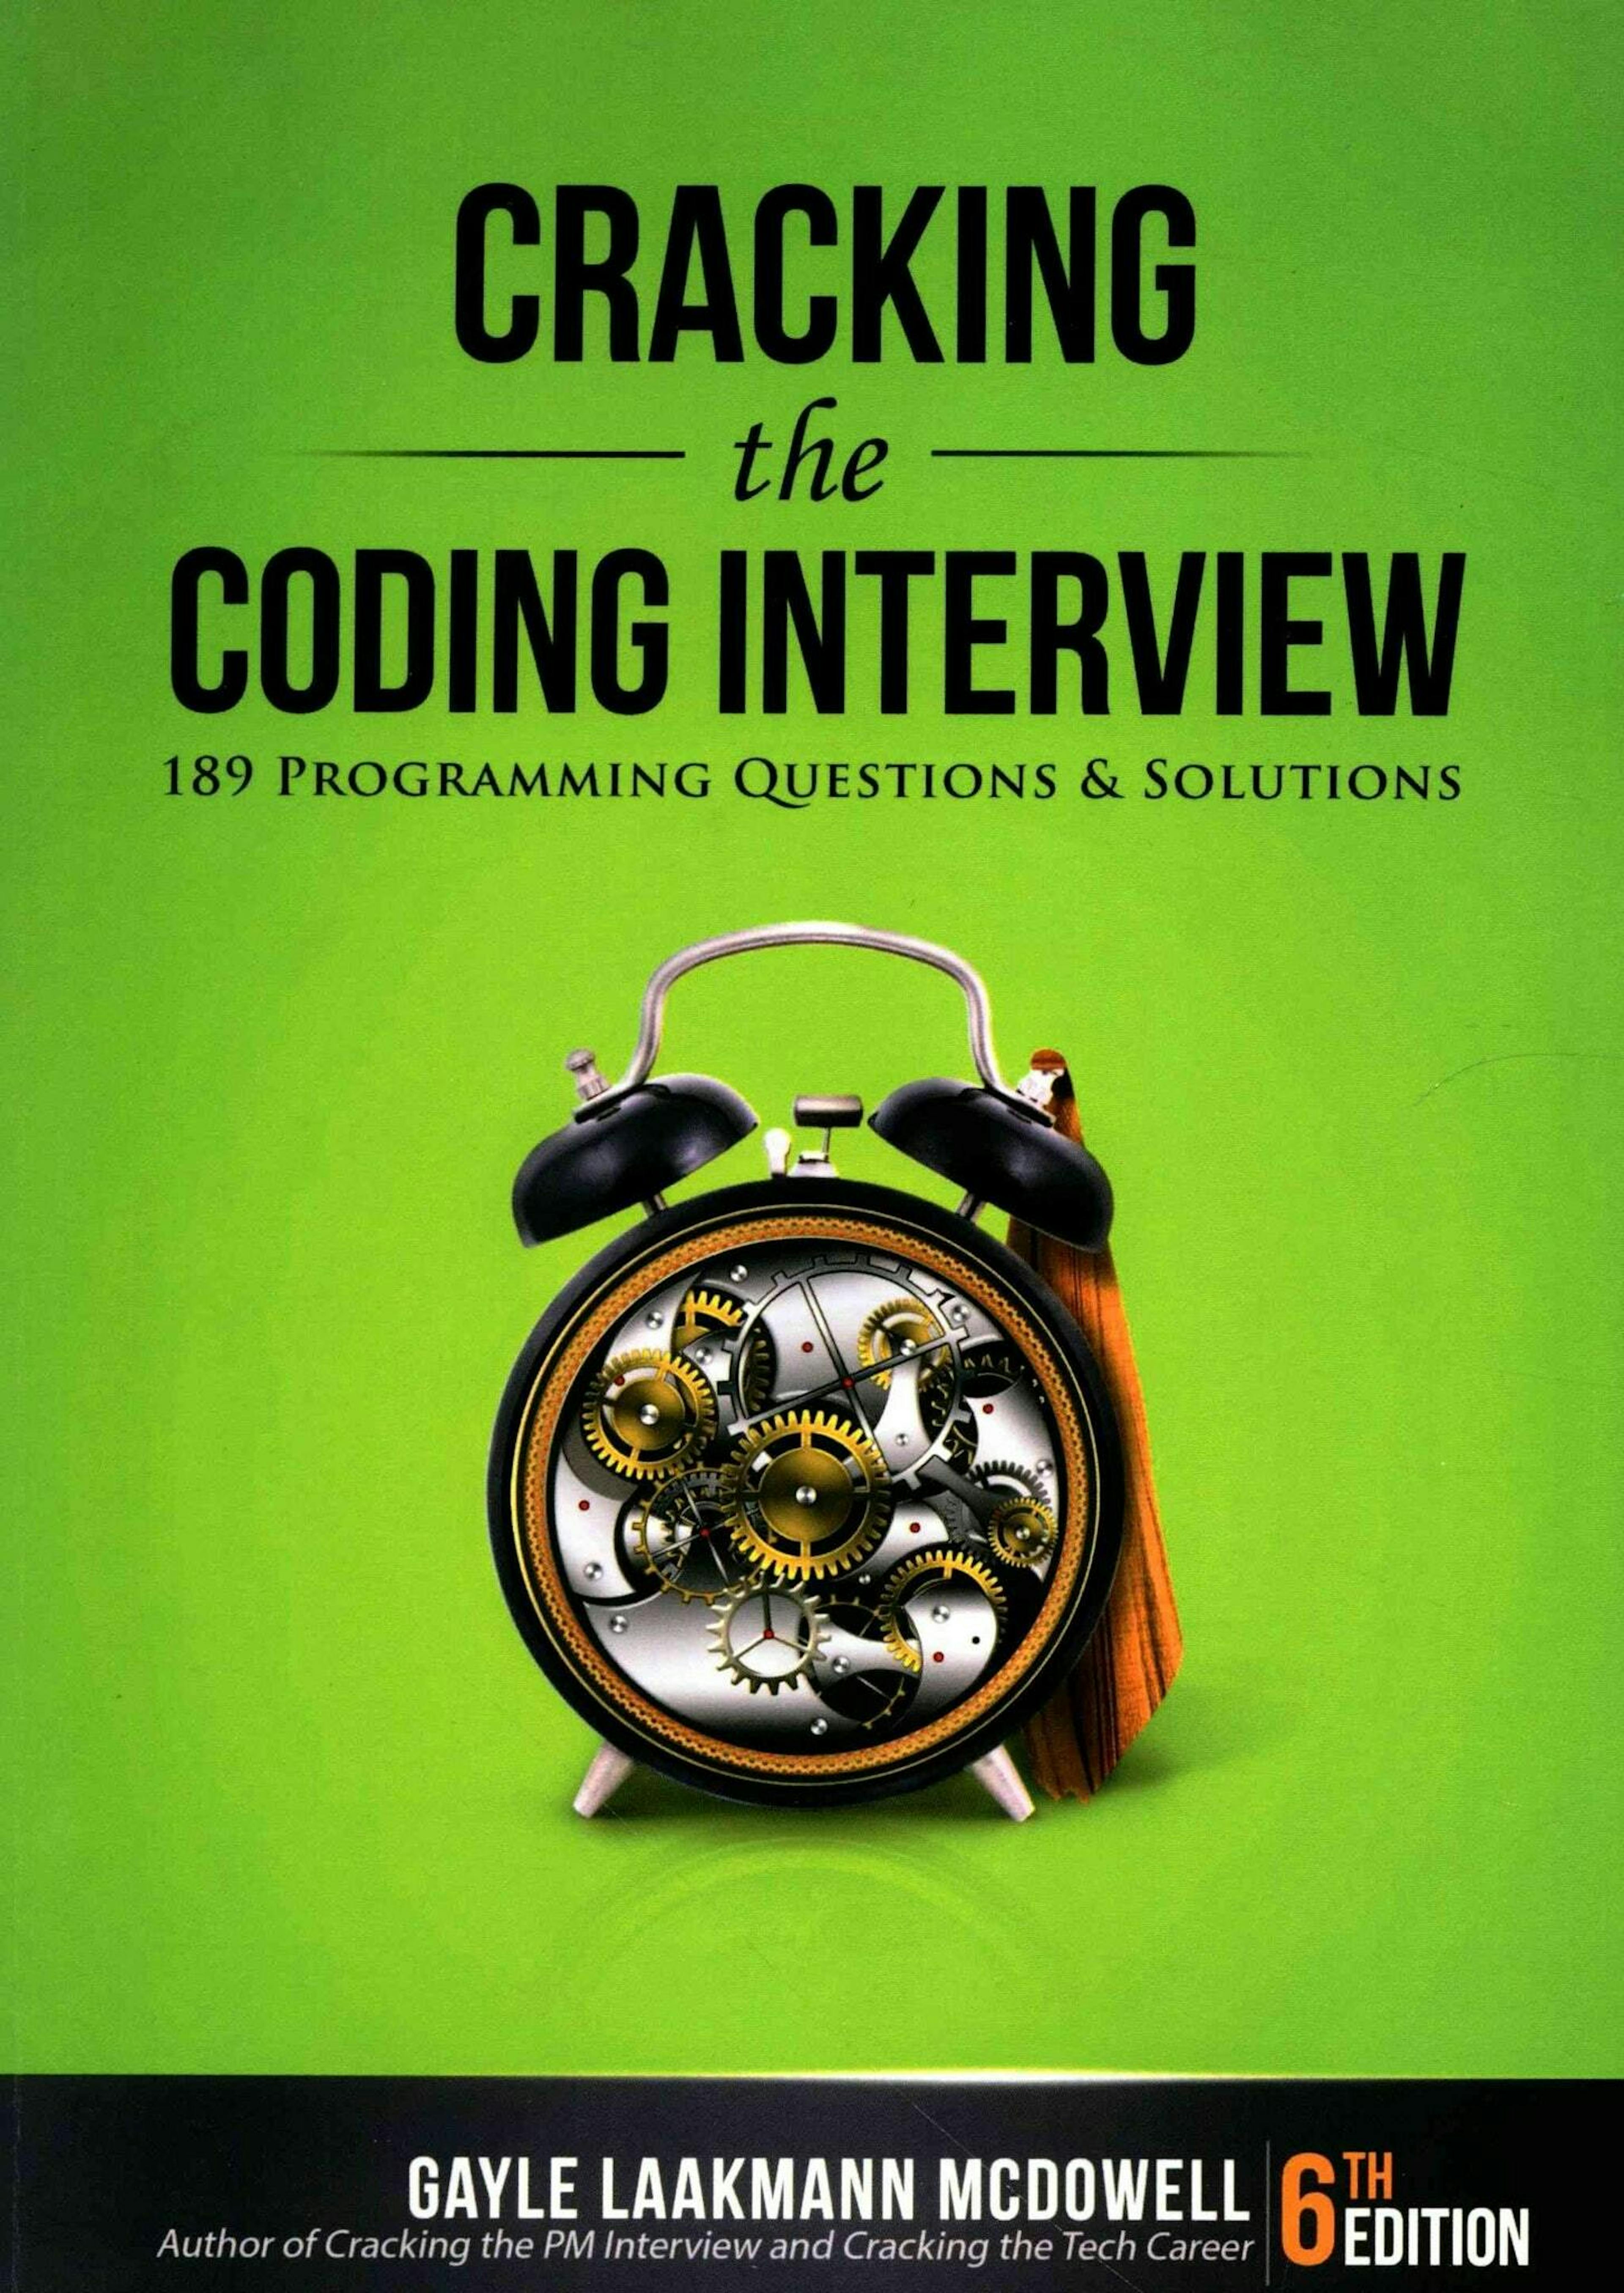 Cracking the Coding Interview book